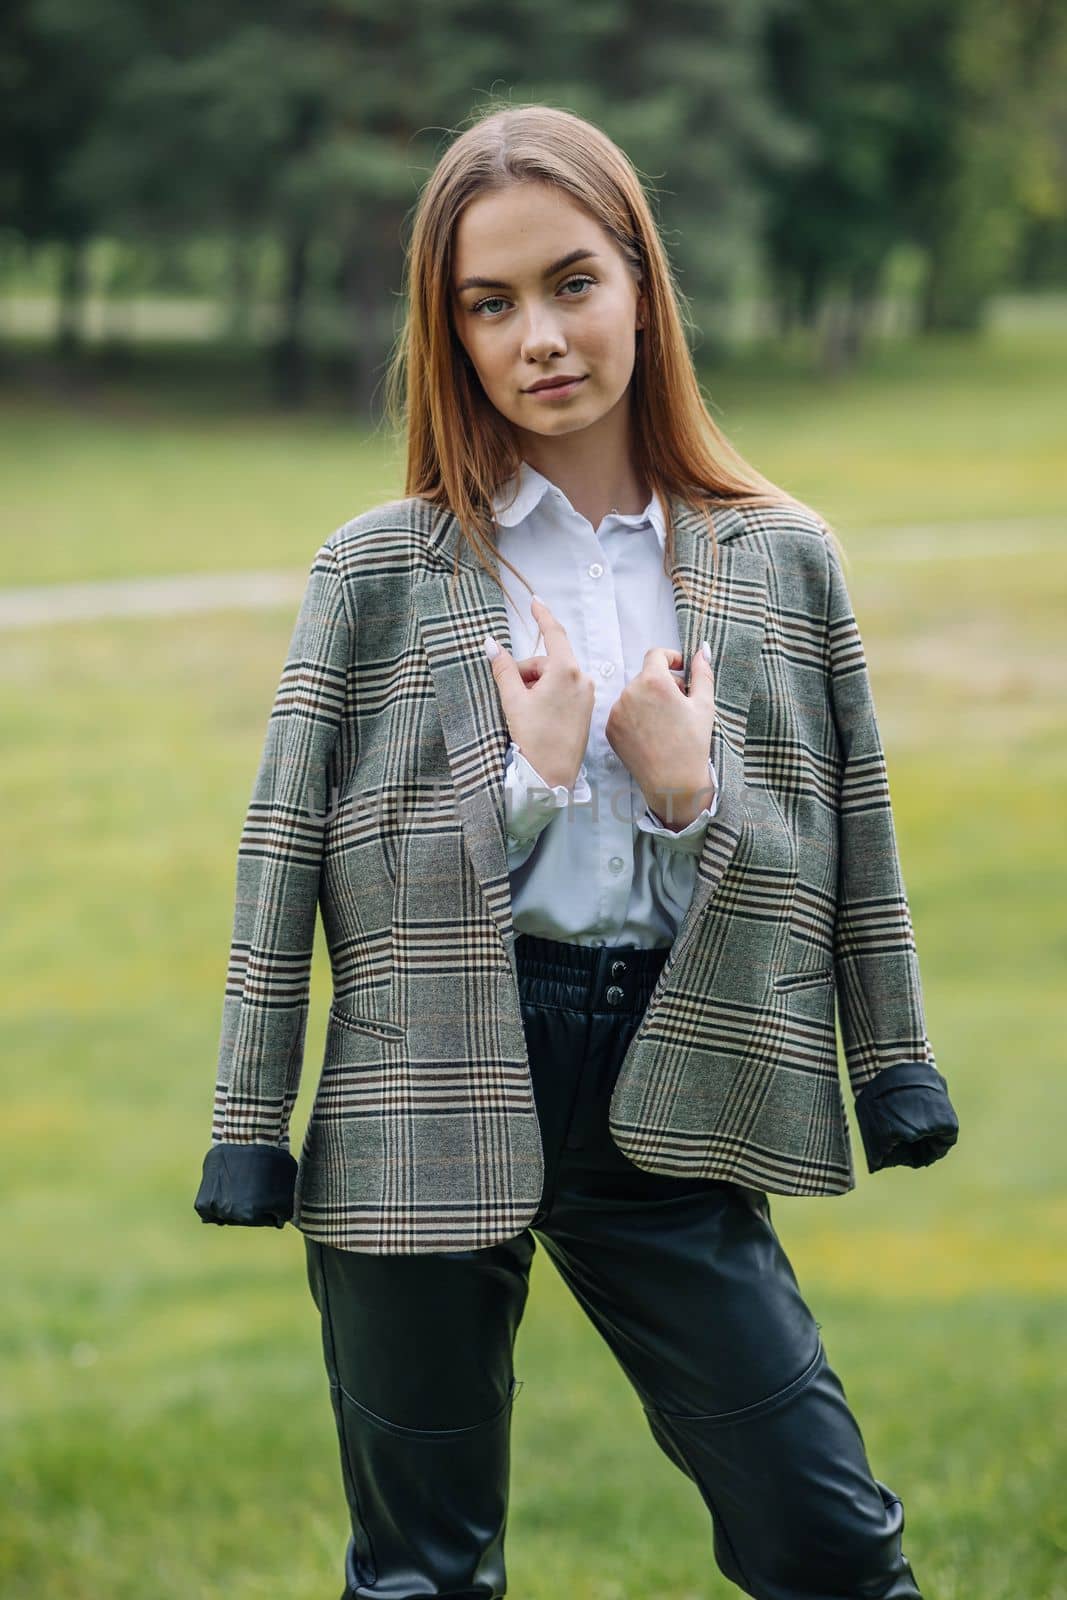 A young girl in a jacket poses in a park in the summer